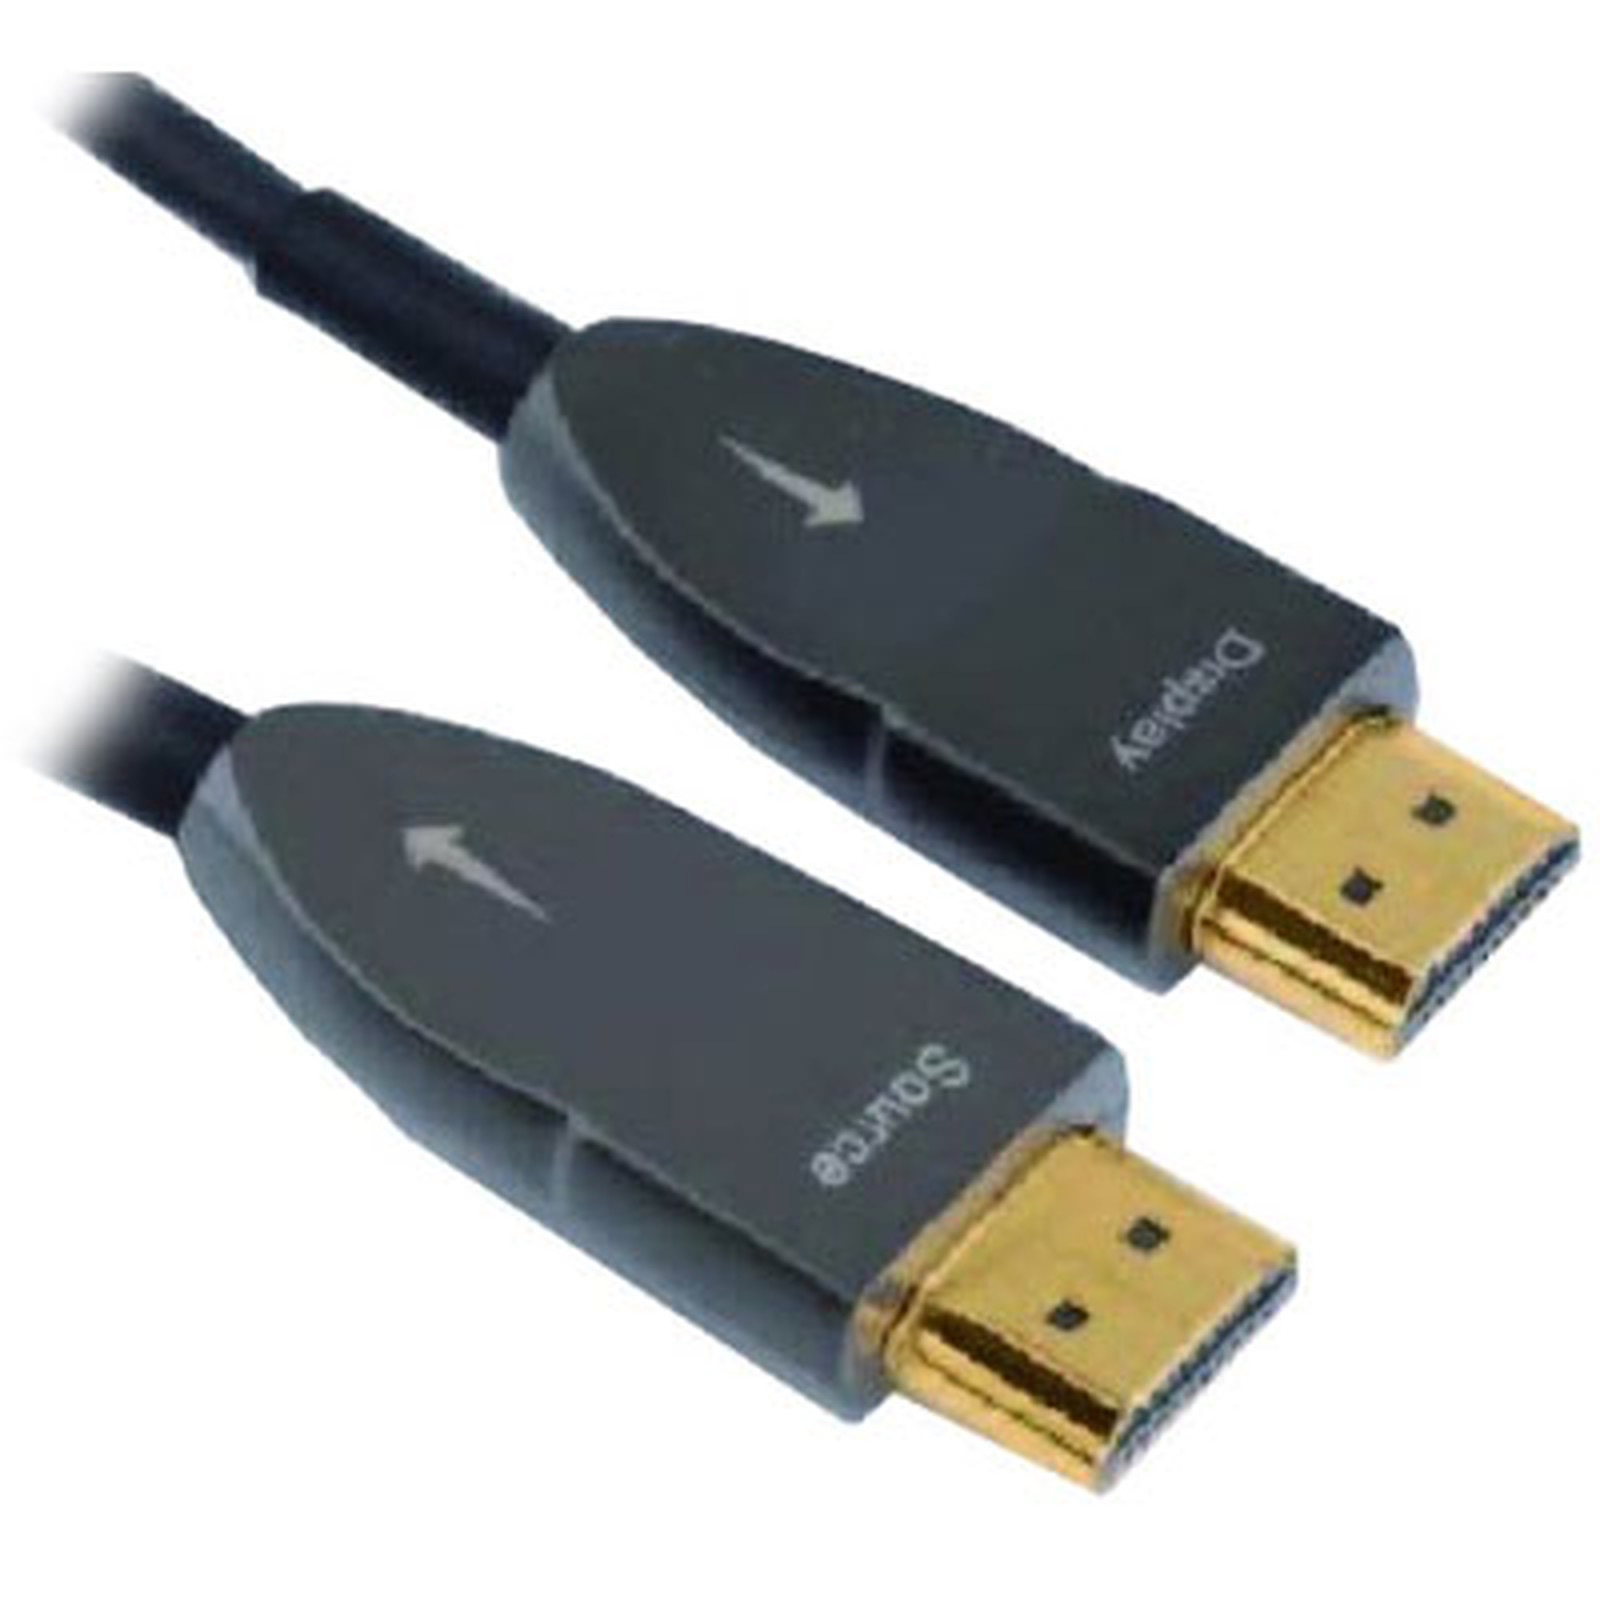 Real Cable HD-OPTIC (15m) - HDMI Real Cable